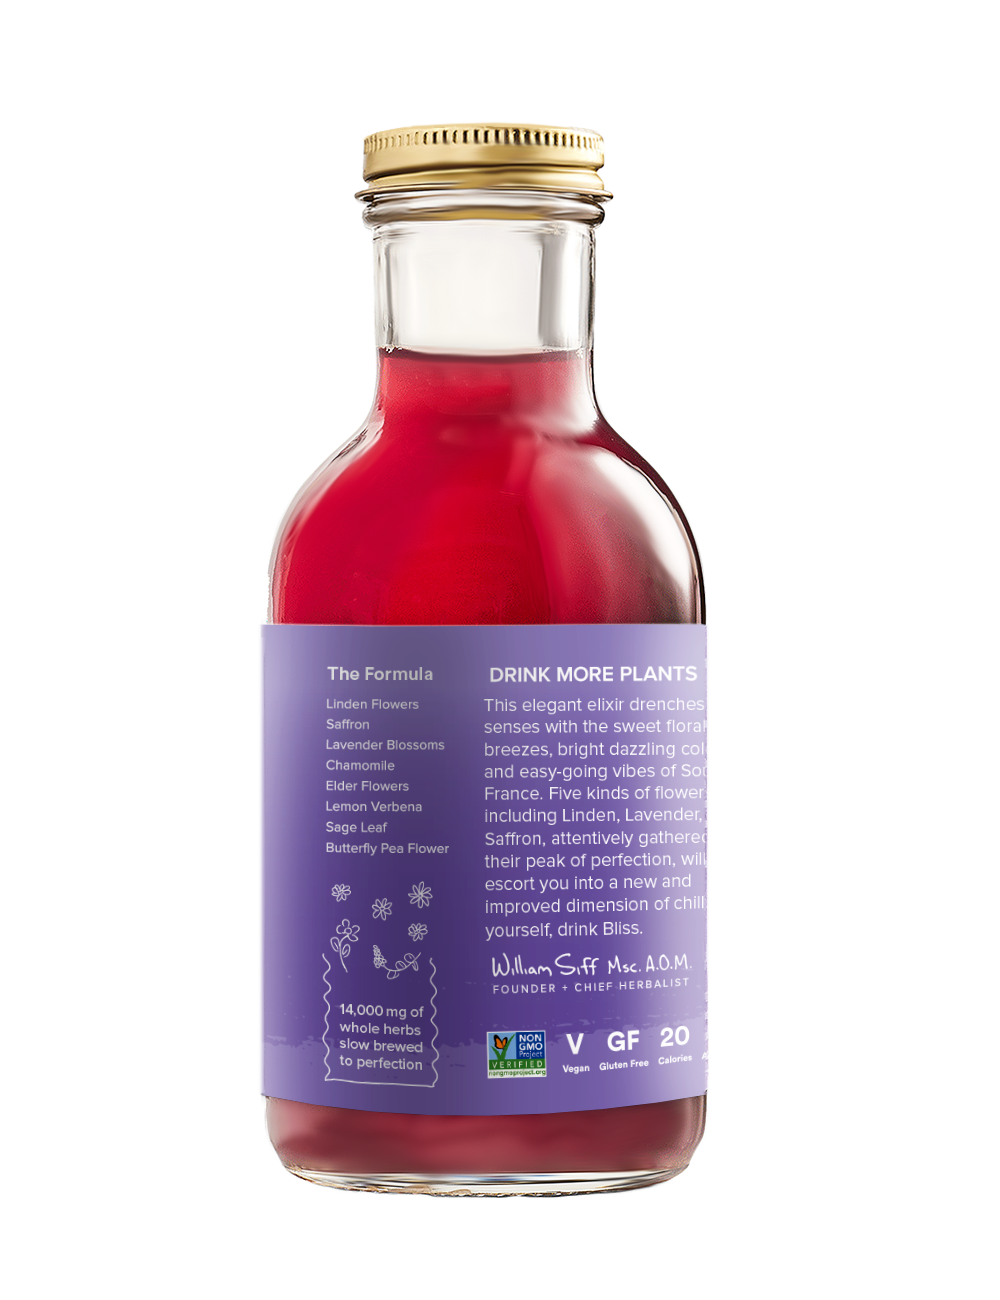 Goldthread Plant-Based Tonics Lavender Bliss Tonic Side Panel View